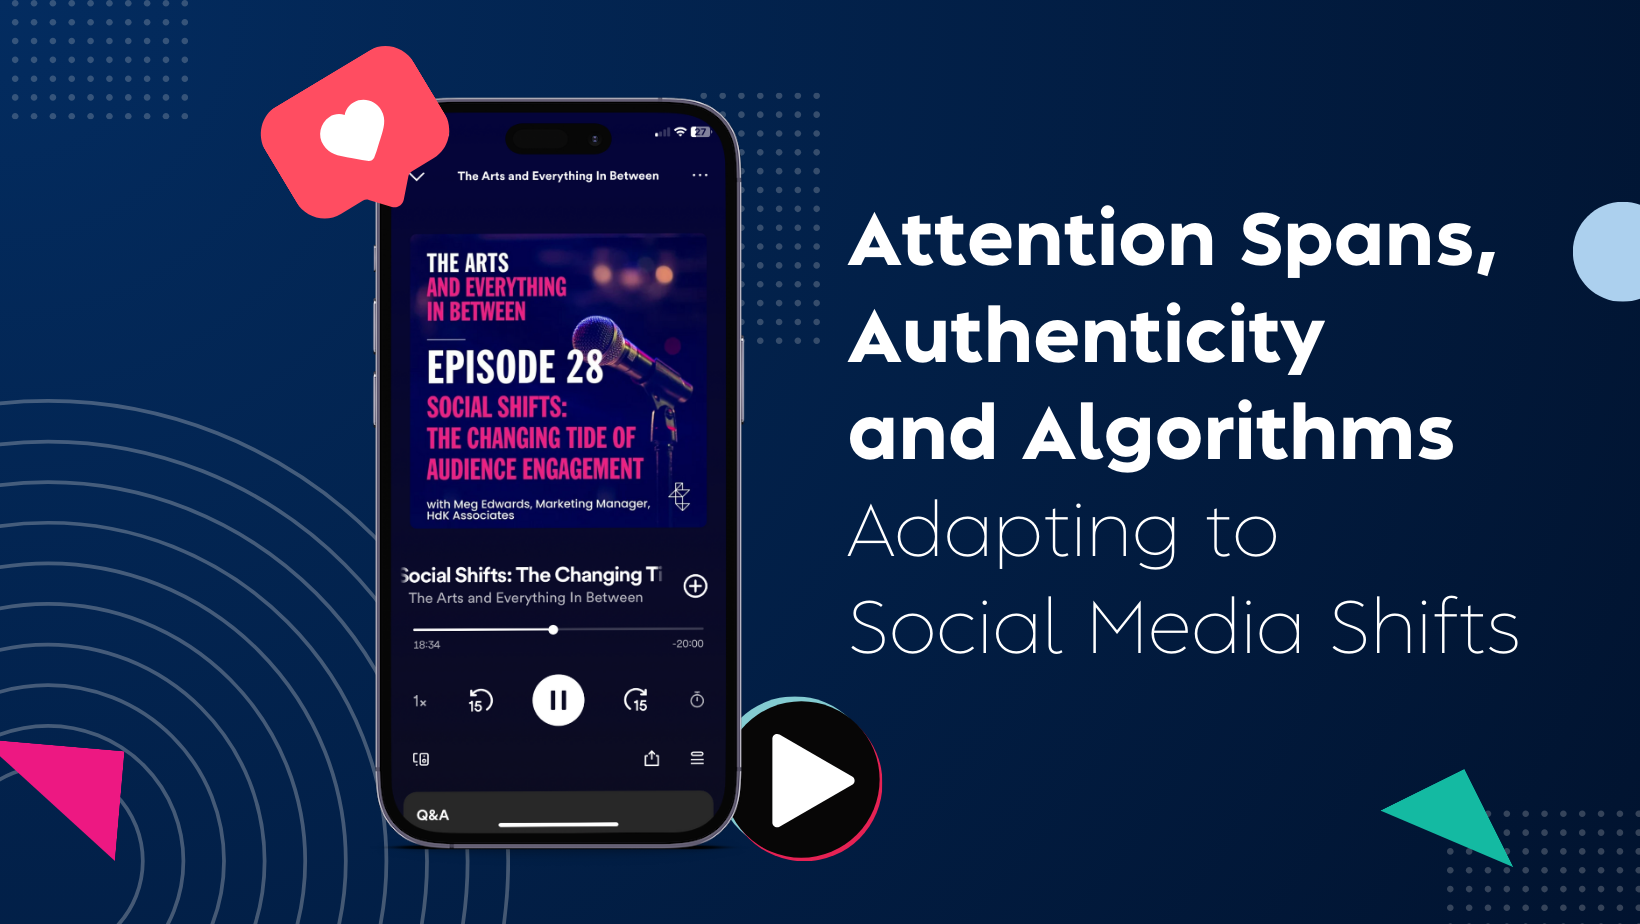 Attention Spans, Authenticity and Algorithms: Adapting to Social Media Shifts